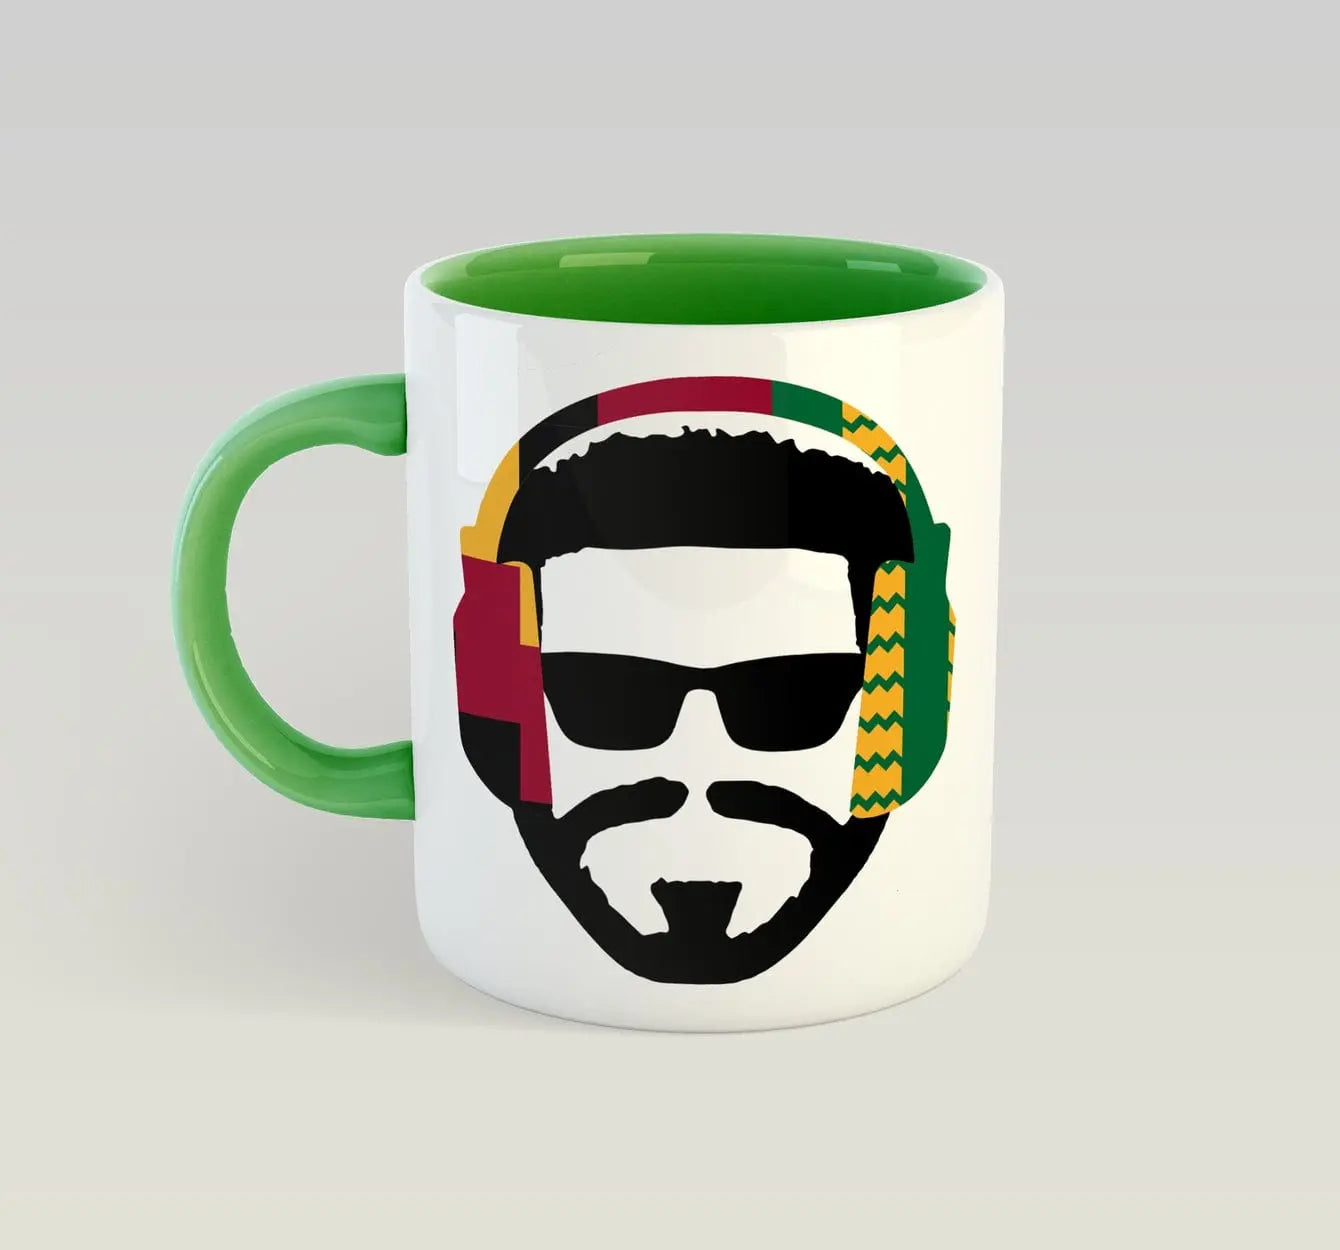 Music Man Mug by Afrotouch - Green - Migration Museum Shop